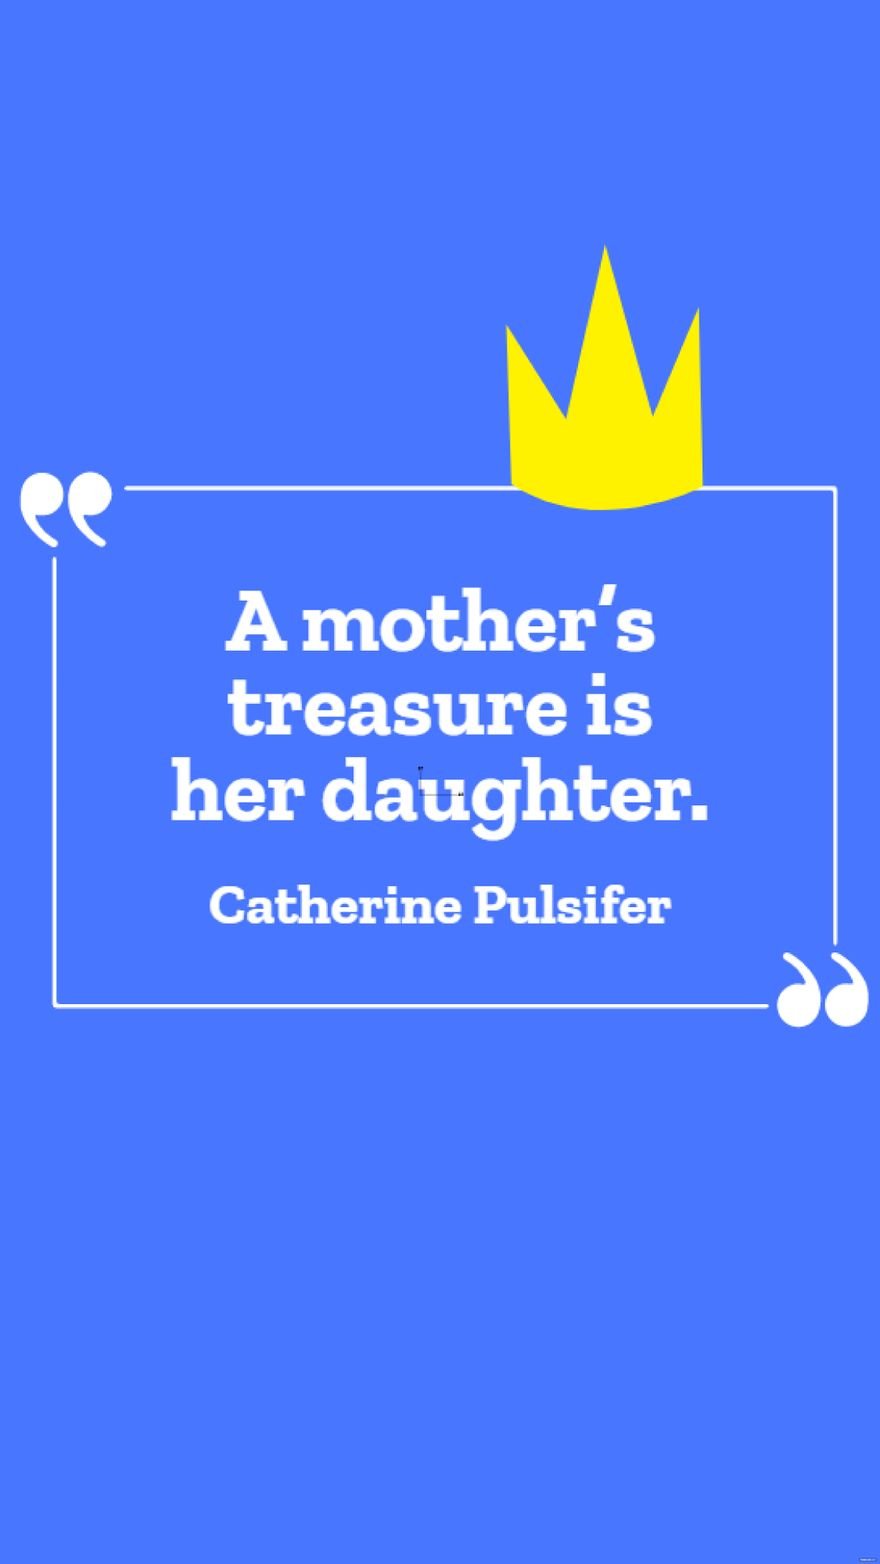 Catherine Pulsifer - A mother’s treasure is her daughter.